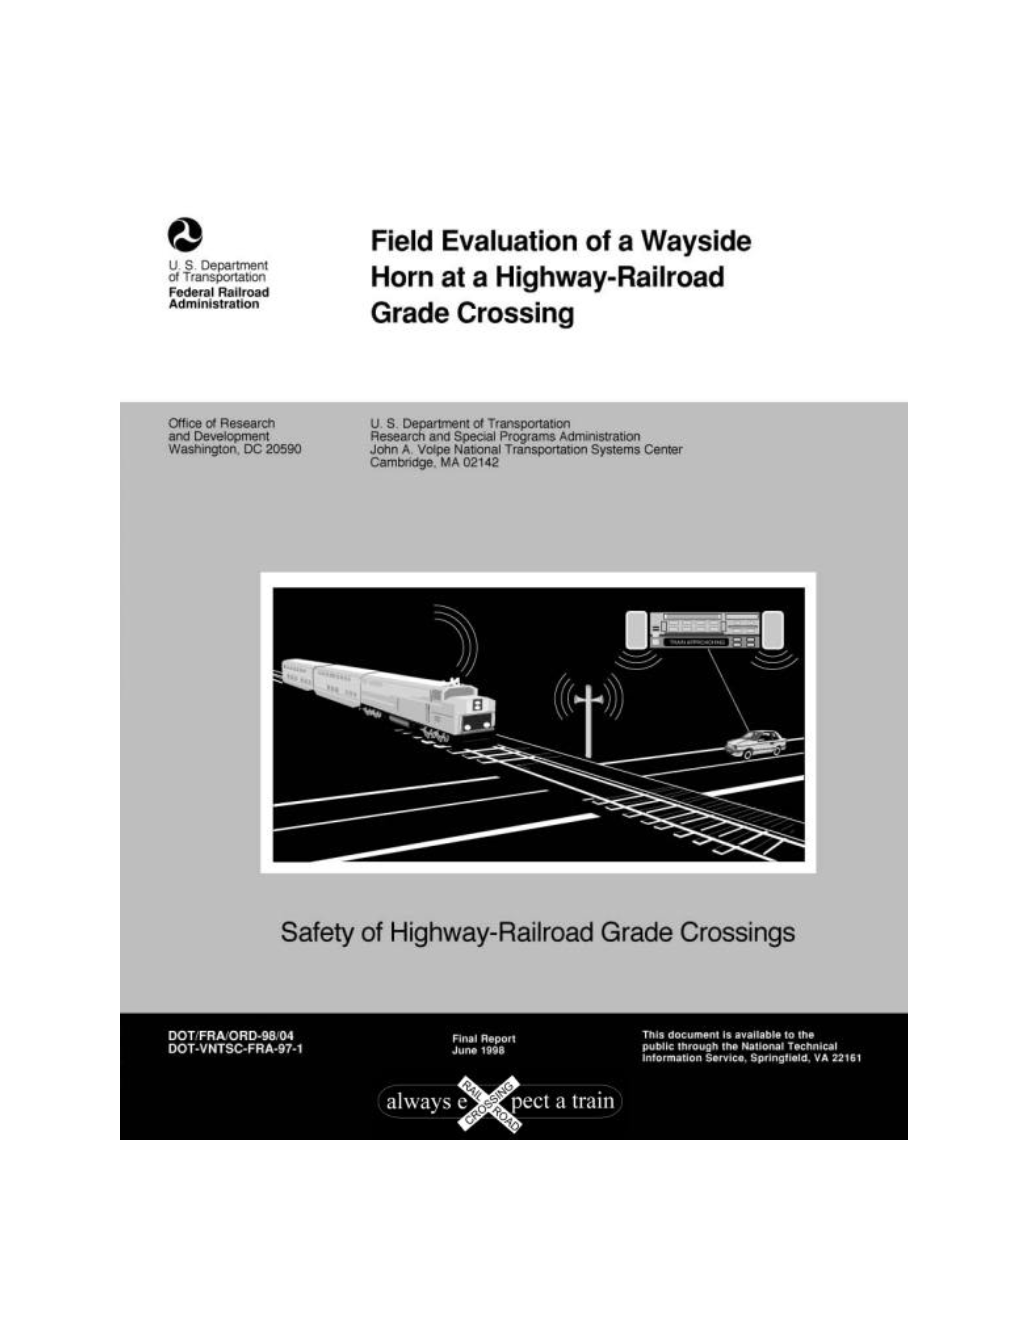 Field Evaluation of a Wayside Horn at a Highway-Railroad Grade Crossing R8026/RR897